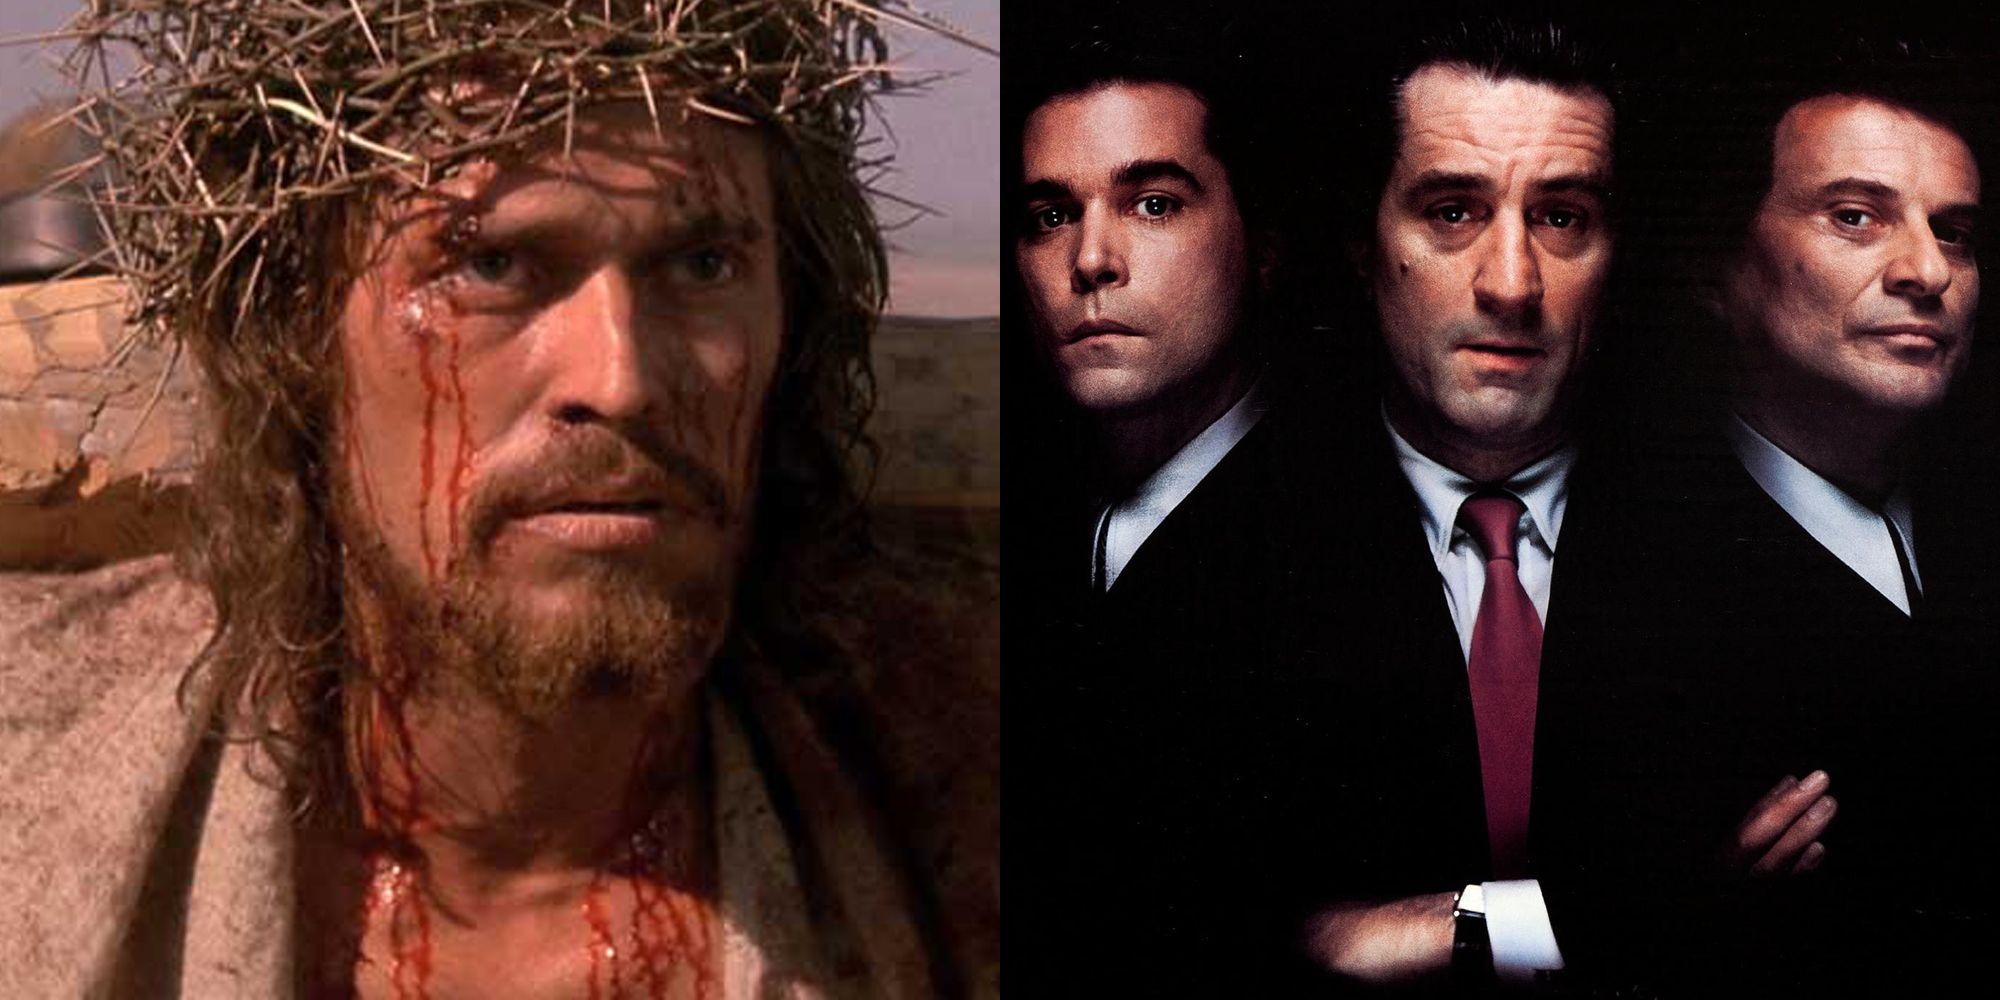 The Last Temptation of Christ and Goodfellas